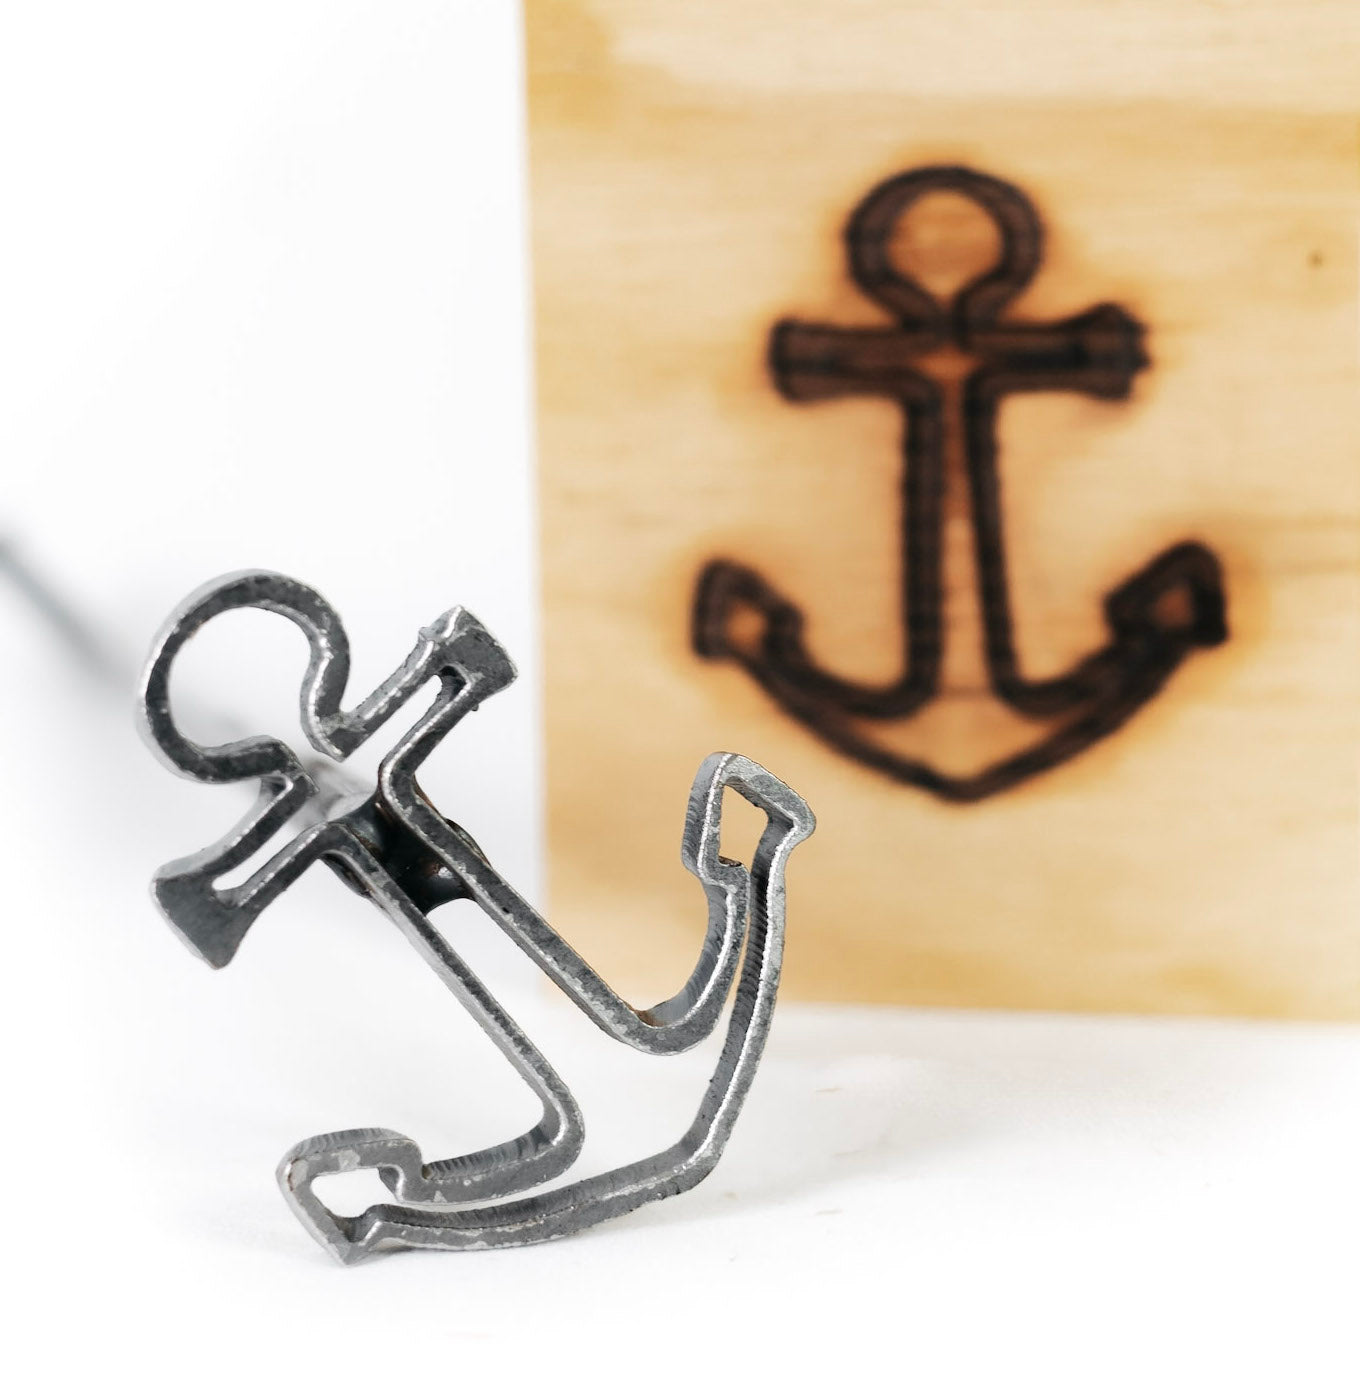 Boat Anchor Brand - 3" - BBQ, Crafts, Woodworking Projects - The Heritage Forge